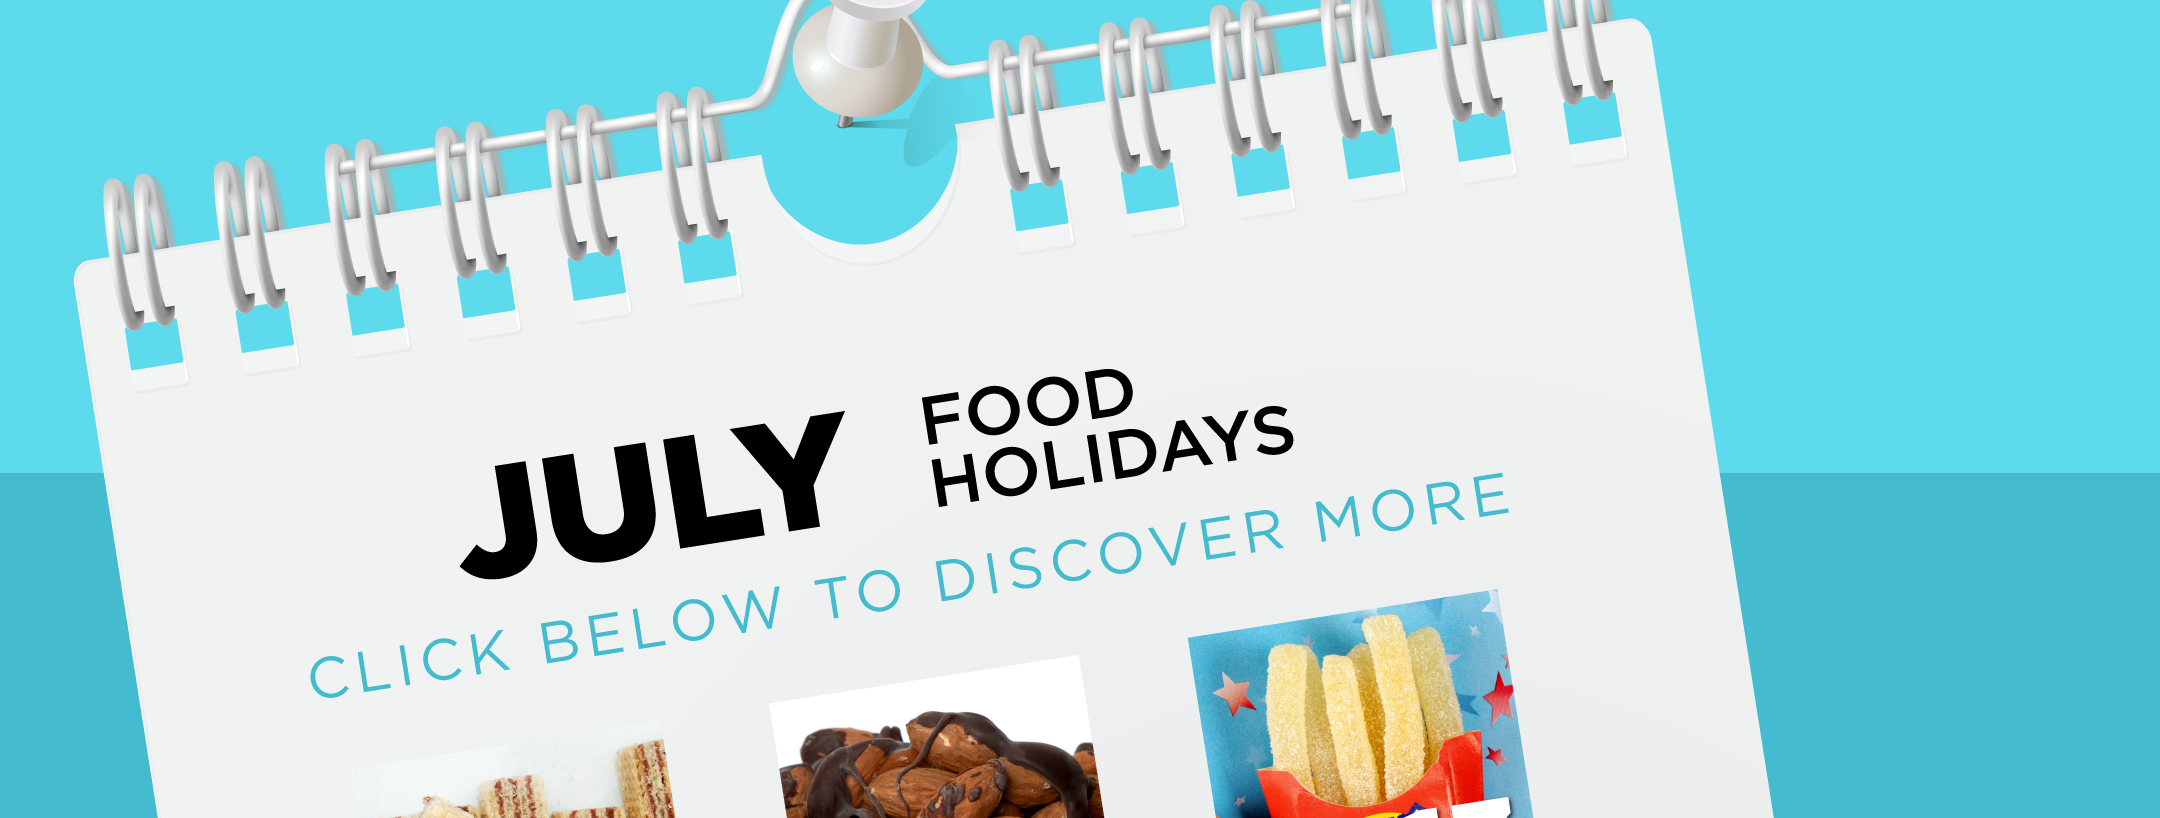 Make July Pop with Food Holidays